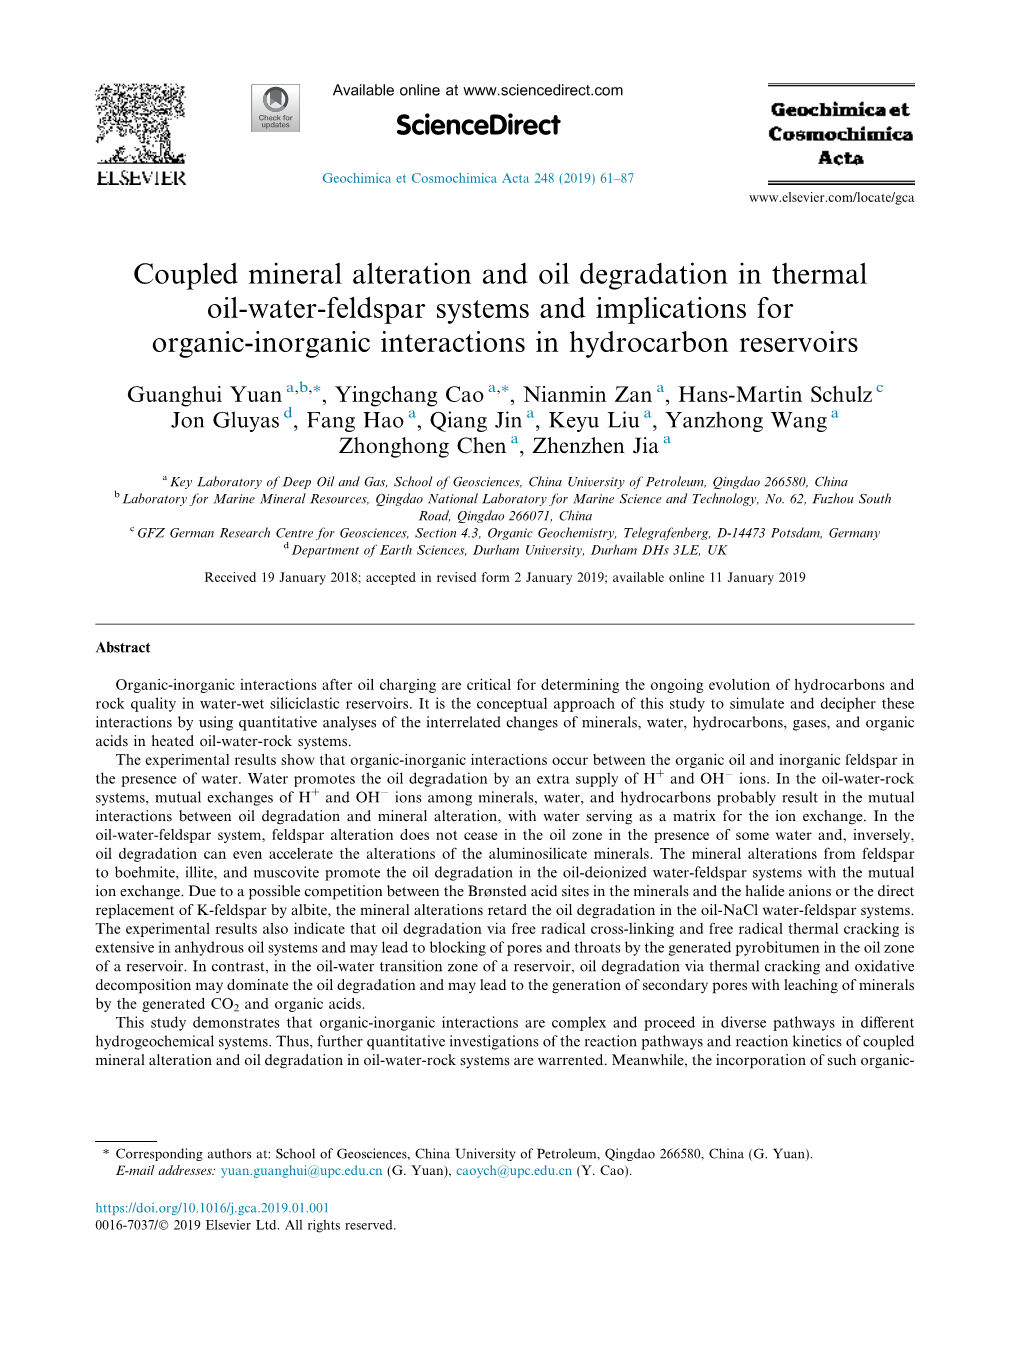 Coupled Mineral Alteration and Oil Degradation in Thermal Oil-Water-Feldspar Systems and Implications for Organic-Inorganic Interactions in Hydrocarbon Reservoirs